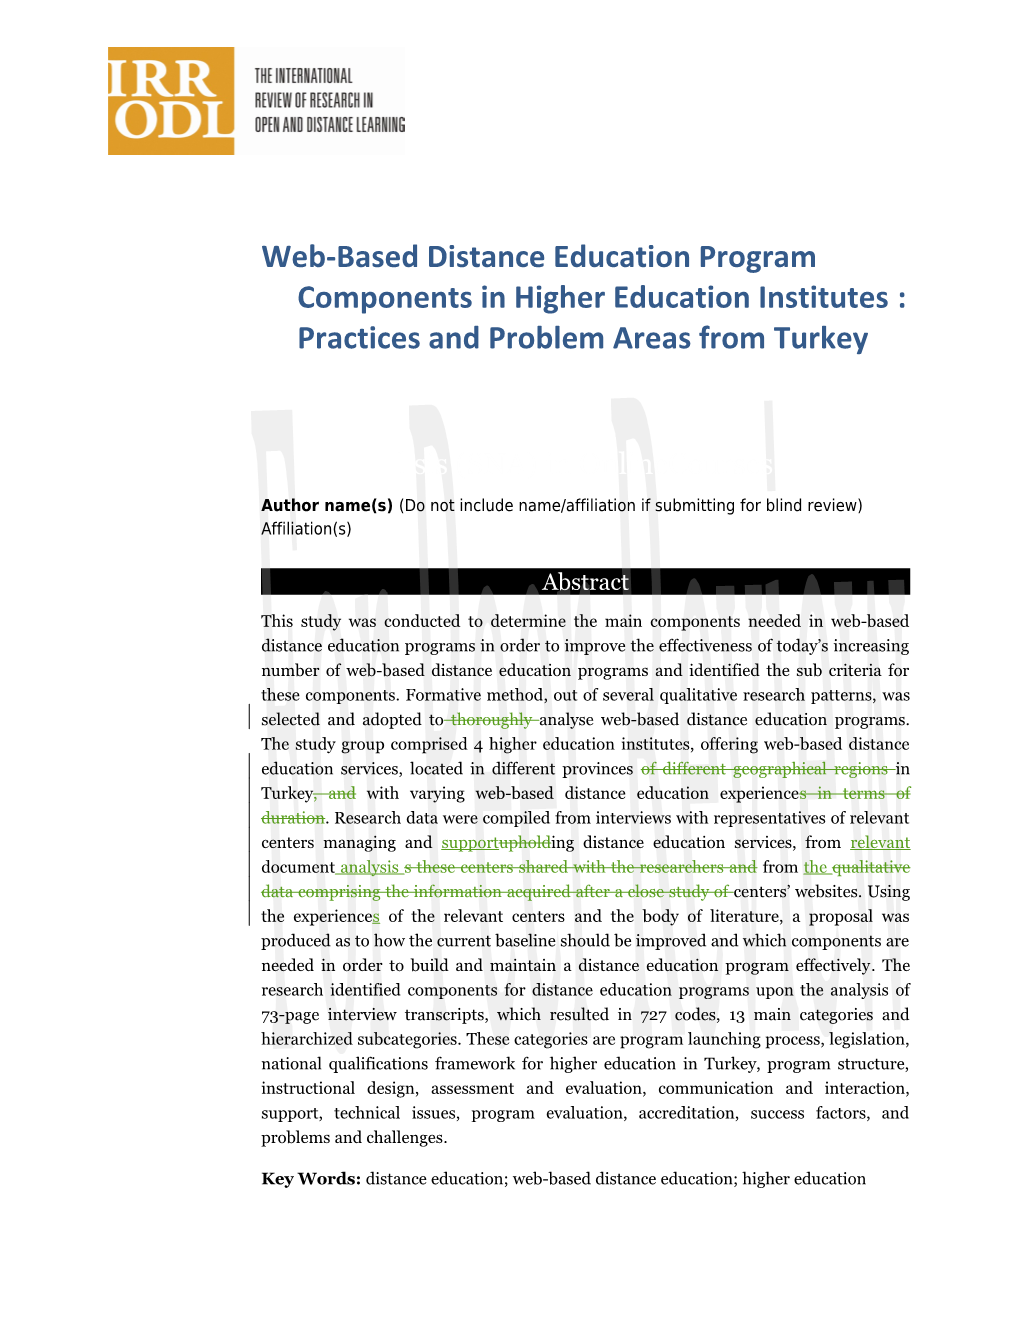 Web-Based Distance Education Program Components in Higher Education Institutes: Practices